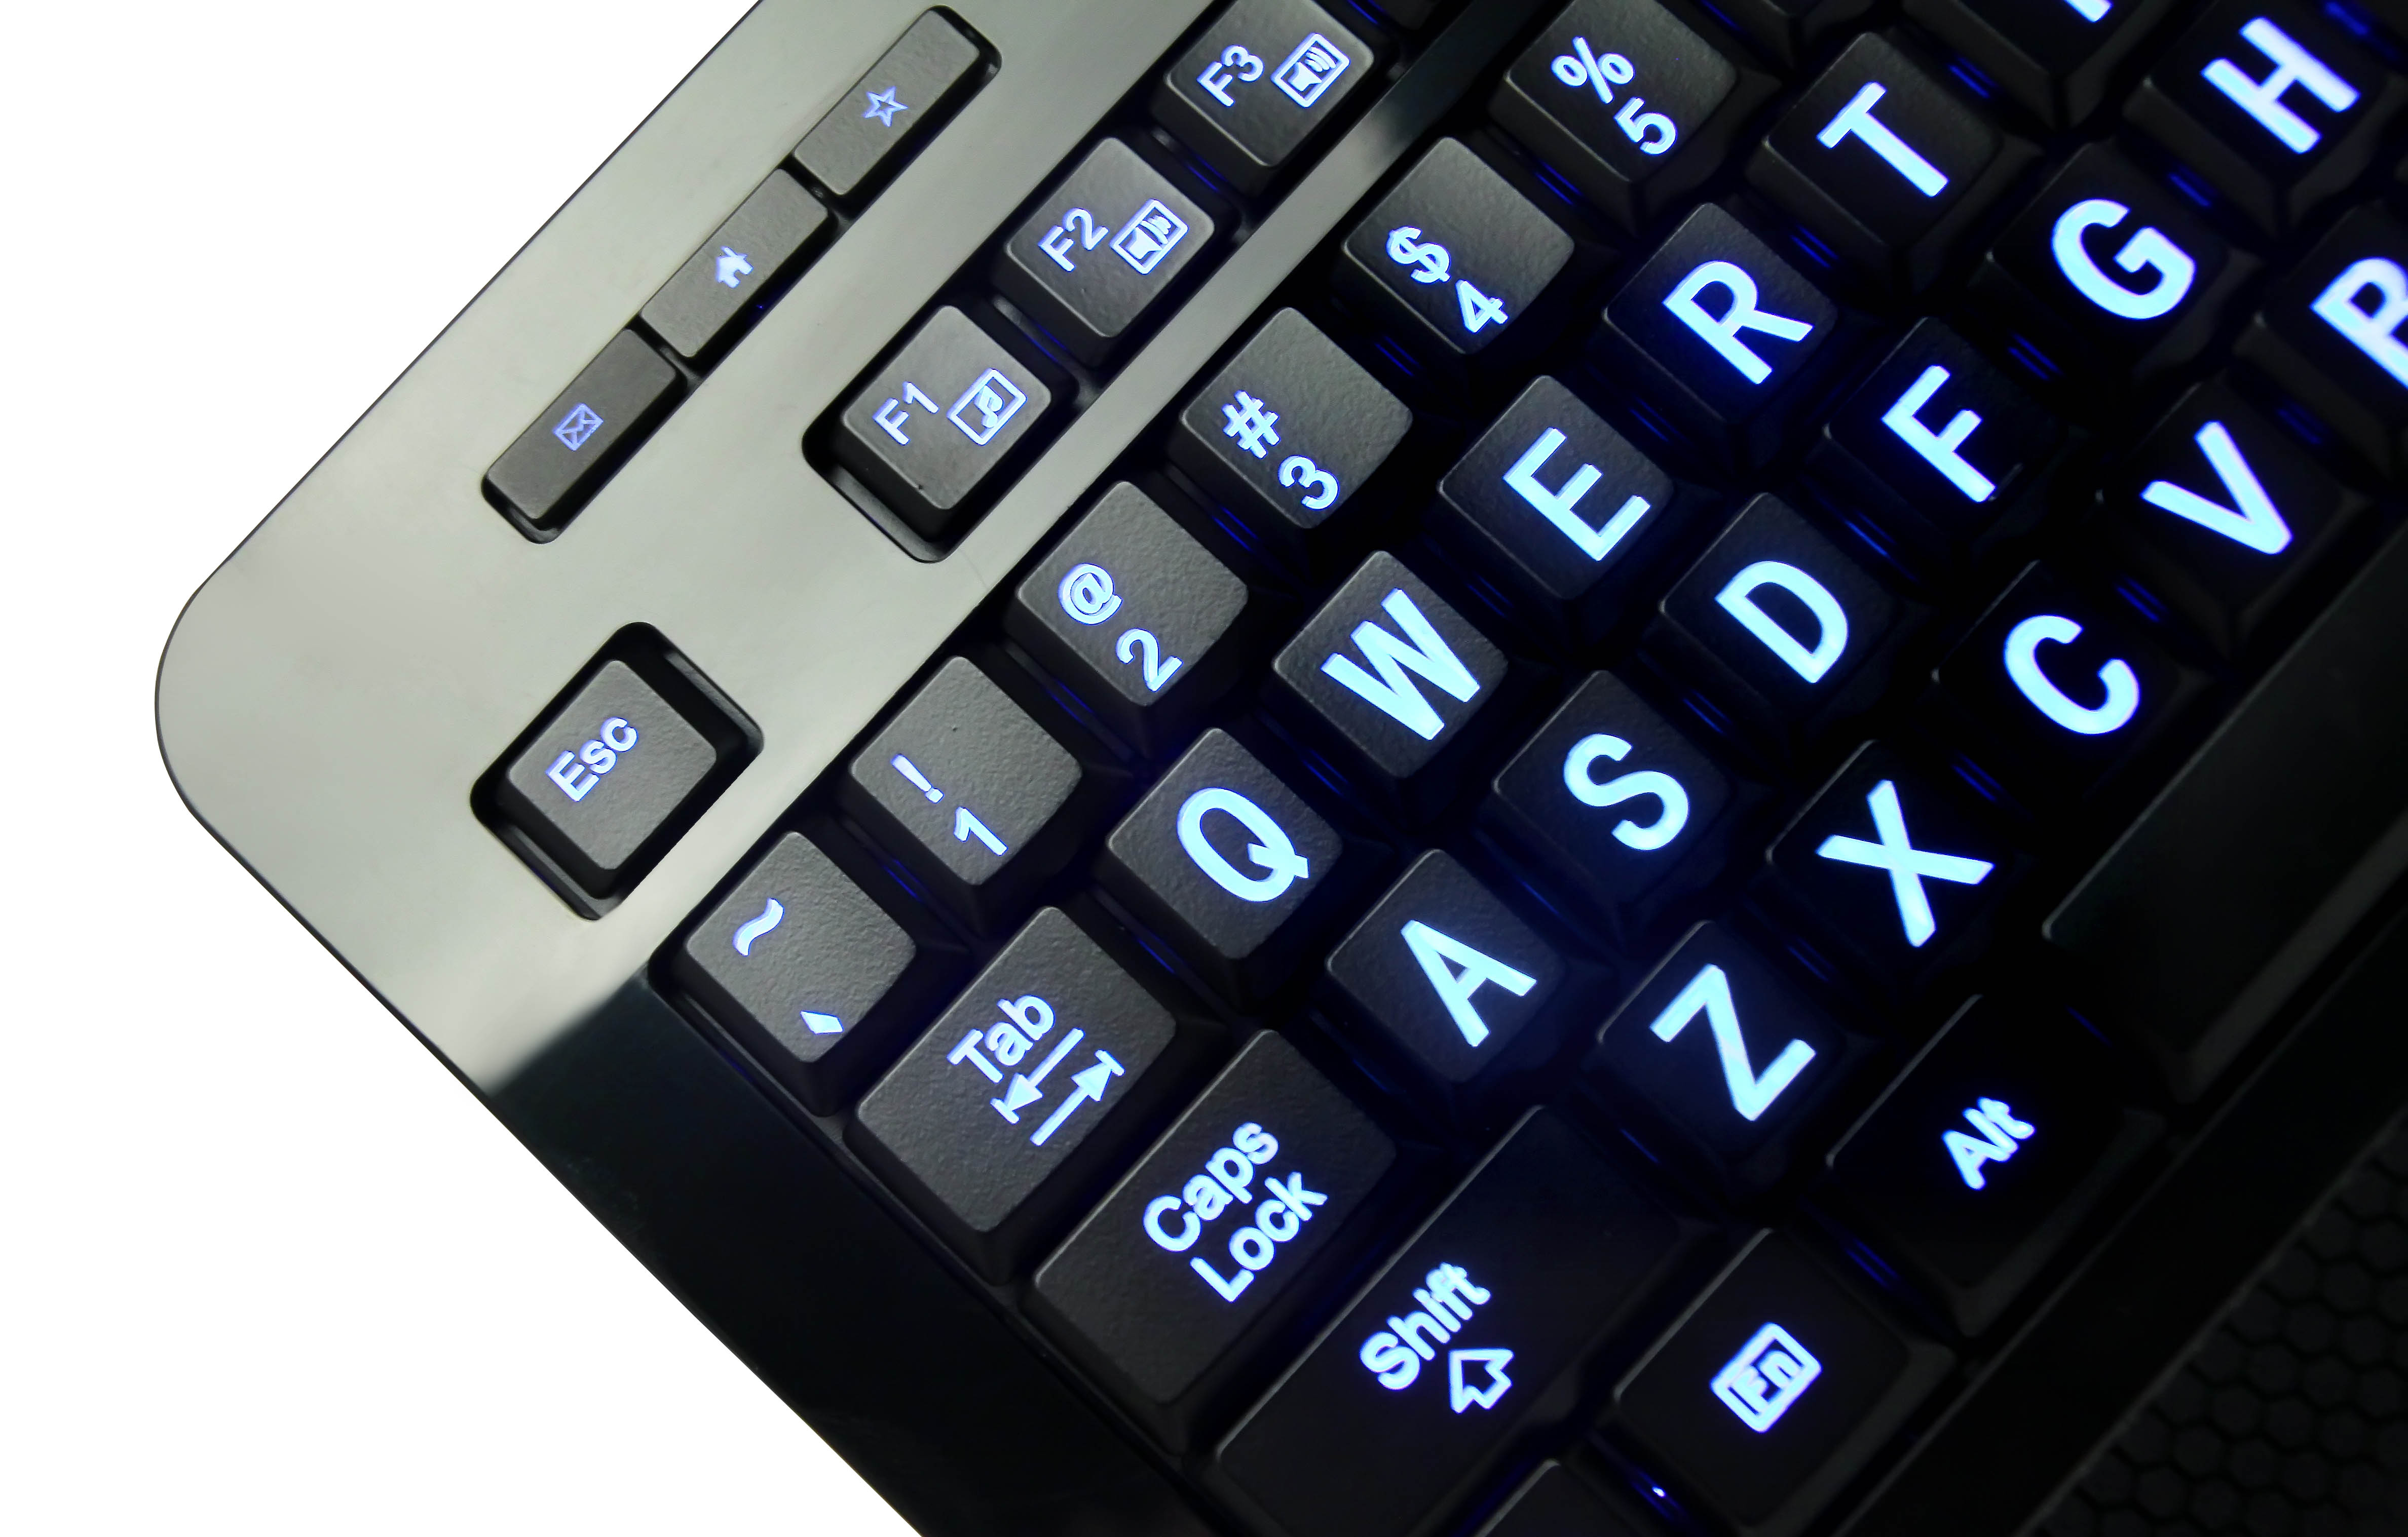 Large Print keys and 5 Interchangeable Backlight Colors